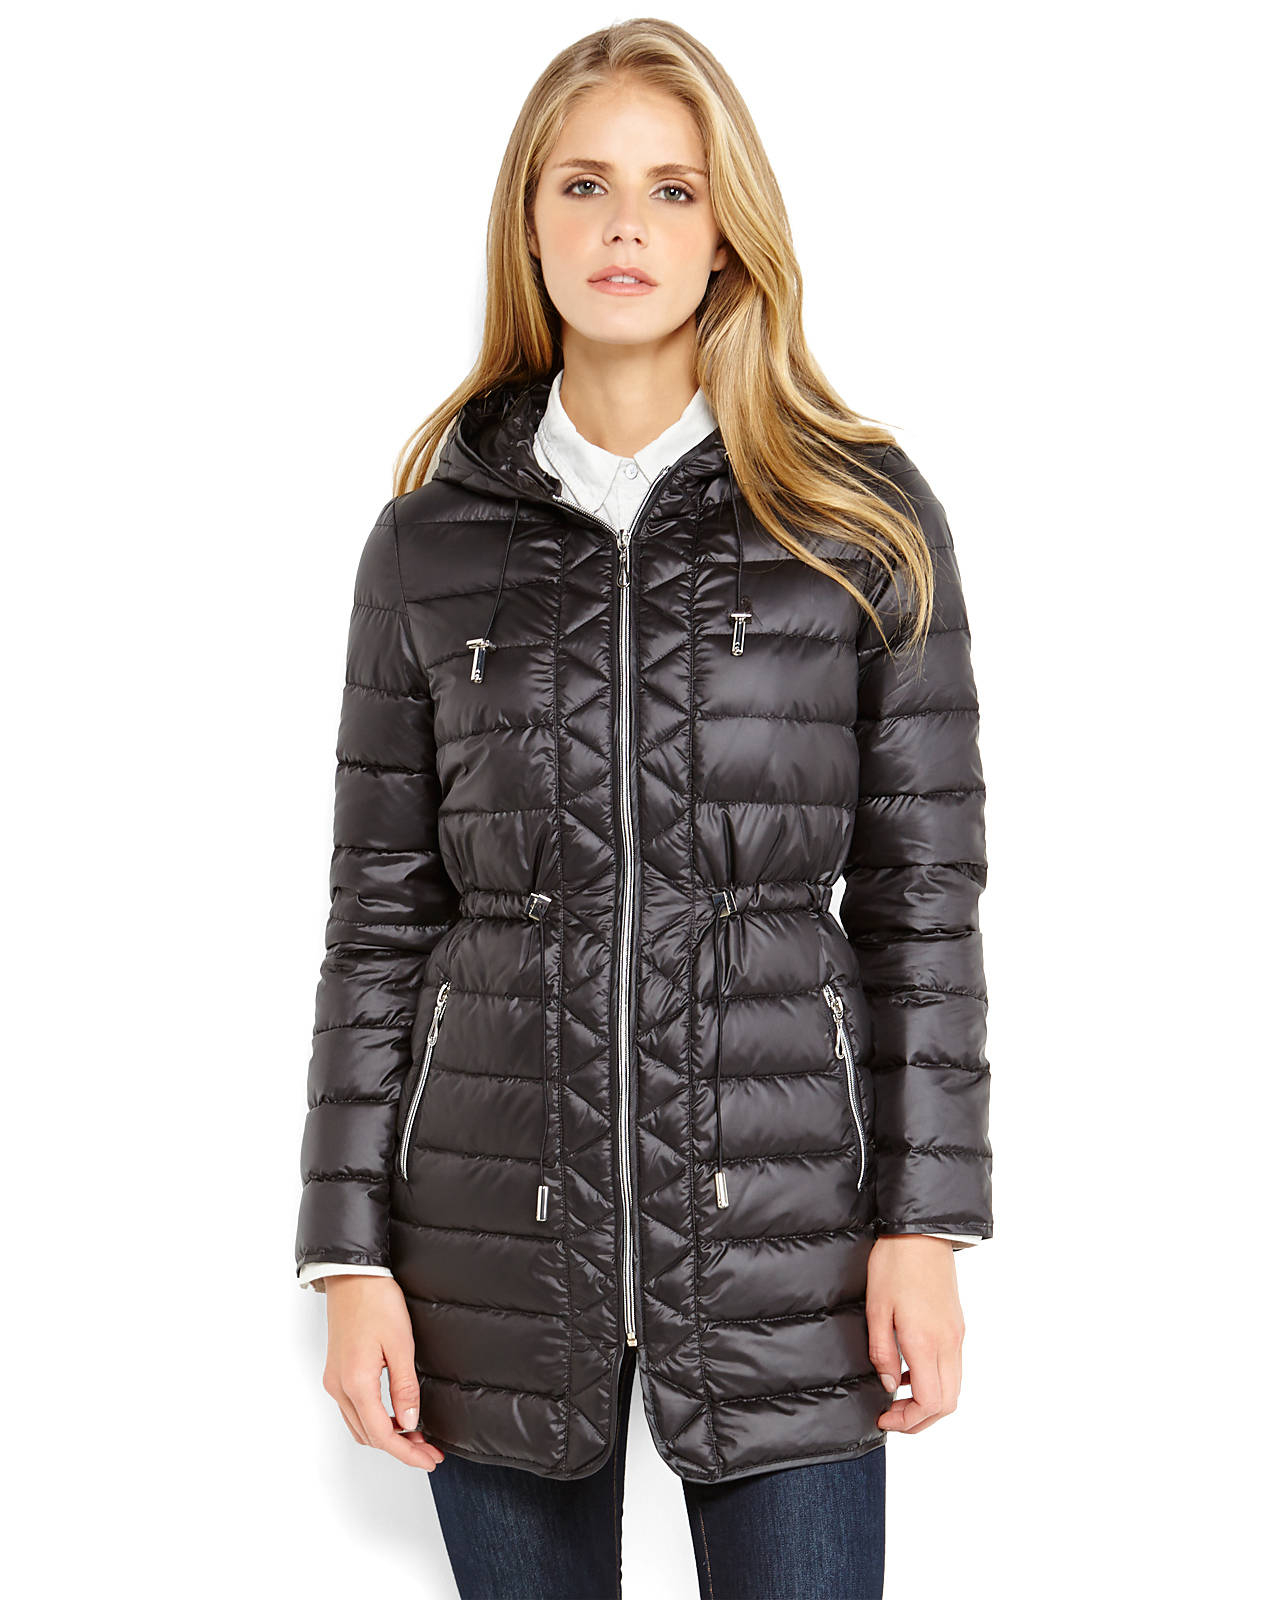 Lyst - Kenneth Cole Hooded Long Packable Down Jacket in Black